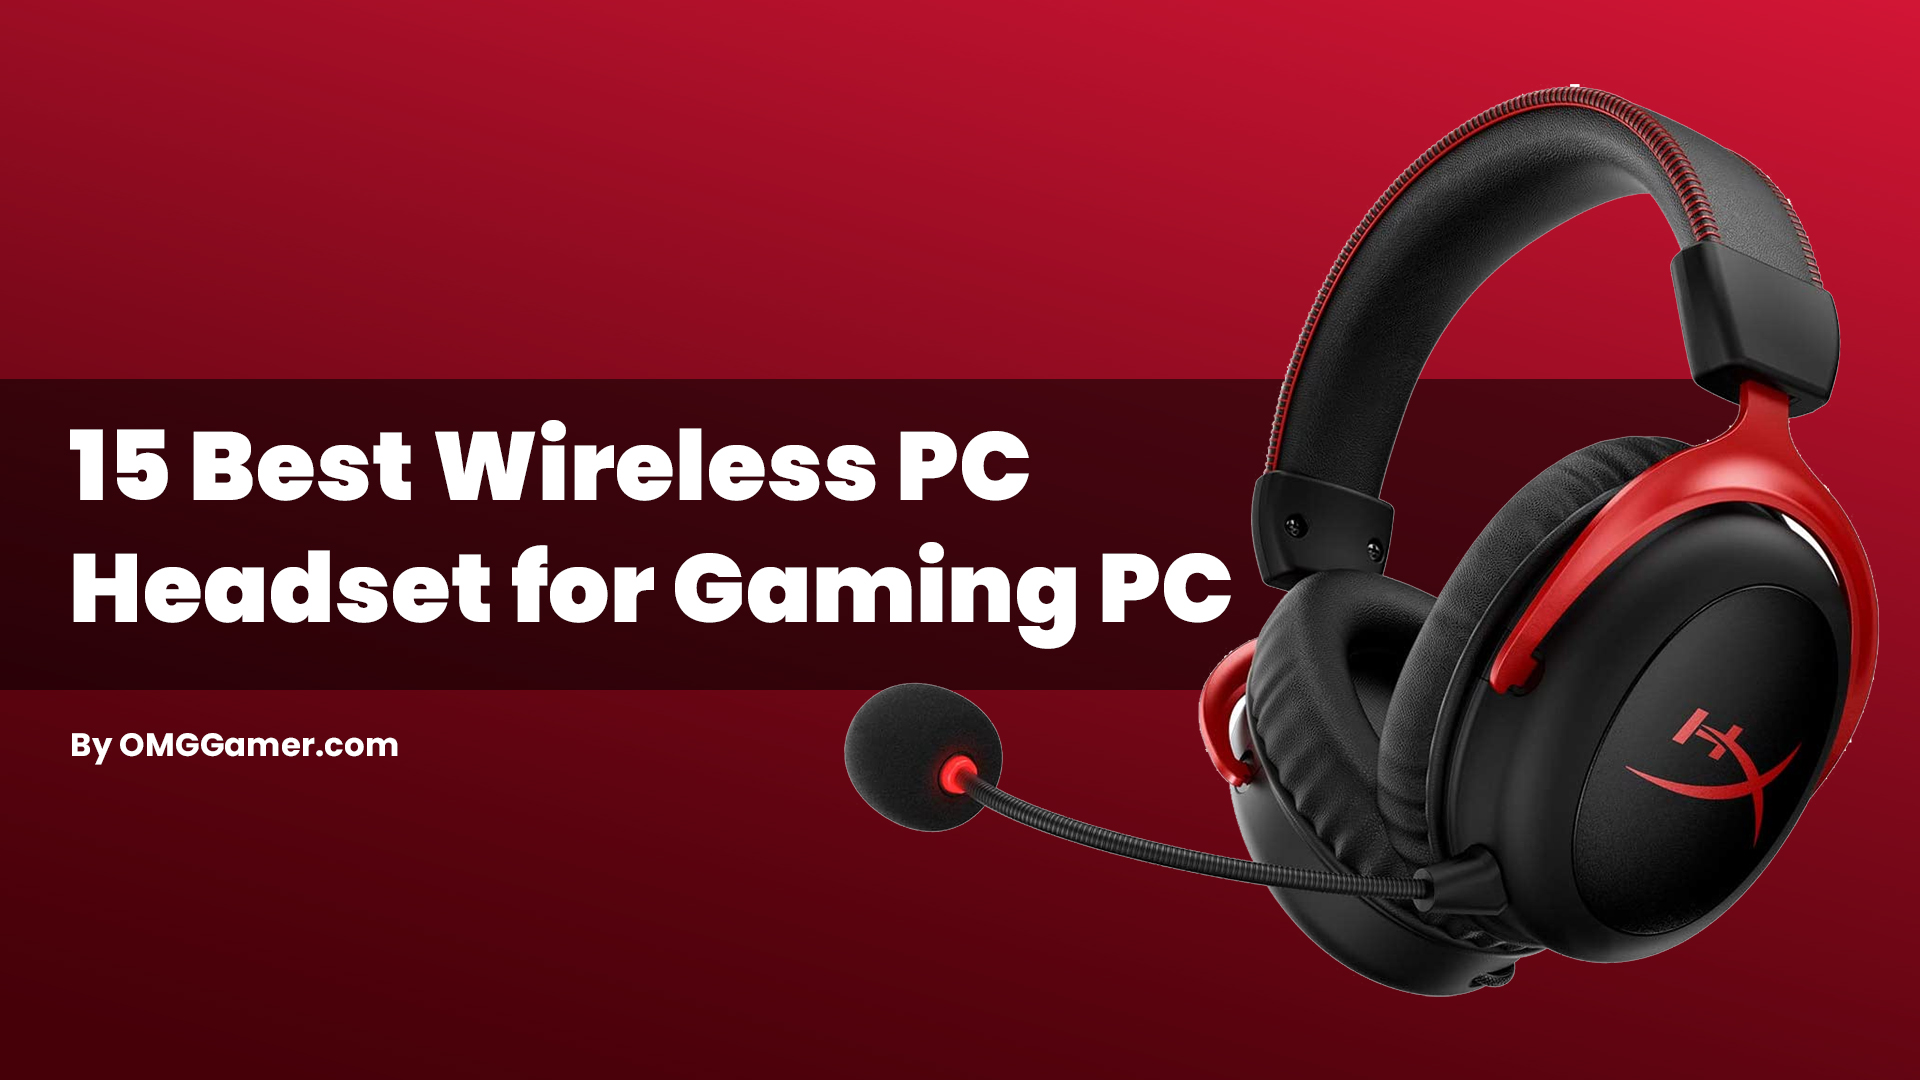 Best Wireless PC Headset for Gaming PC